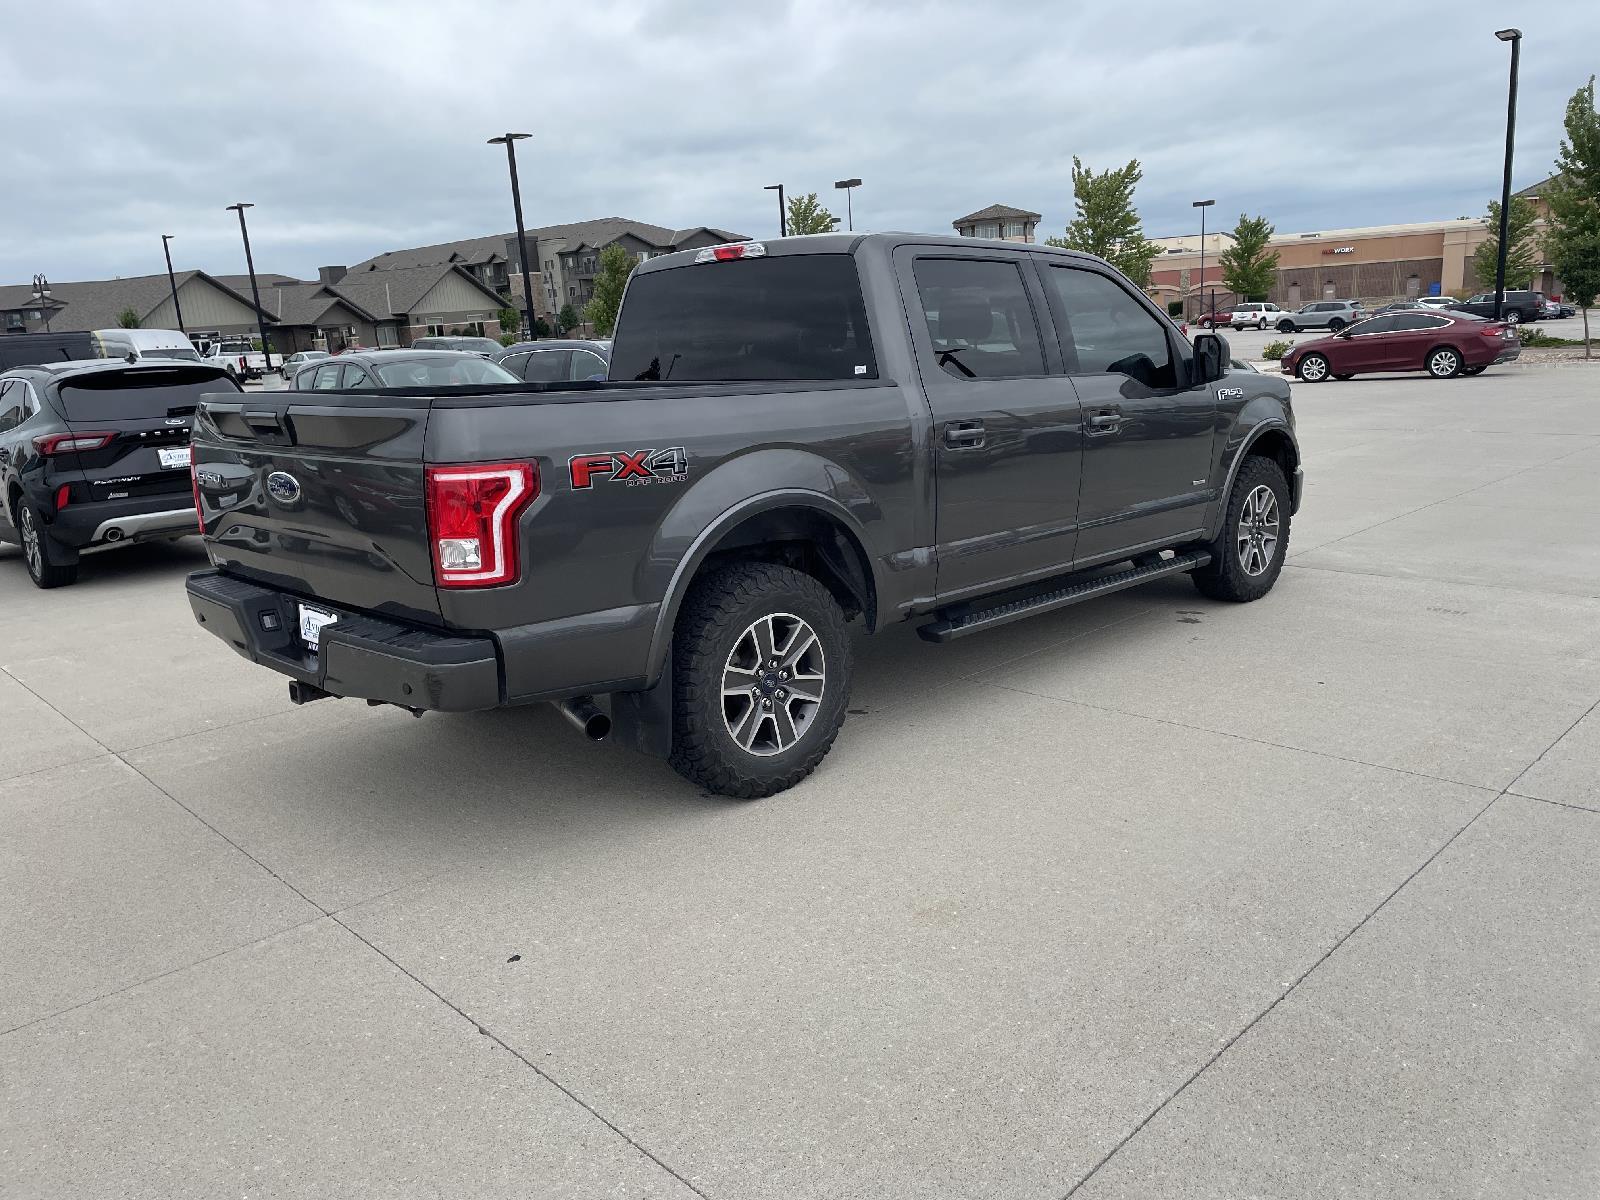 Used 2017 Ford F-150 XLT Crew Cab Truck for sale in Lincoln NE